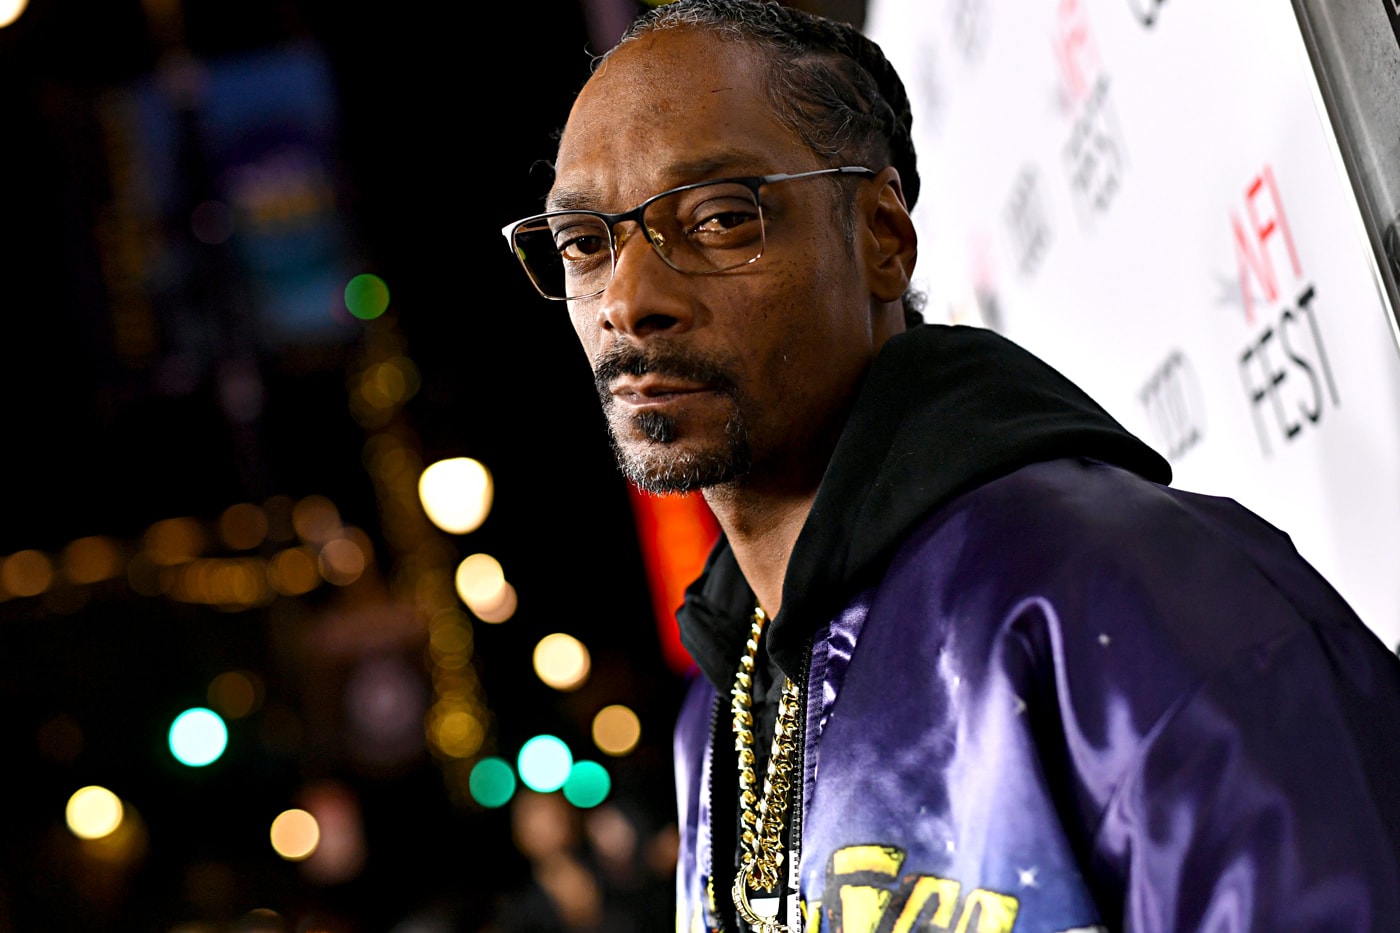 watch-snoop-dogg-hilariously-narrate-plizzanet-earth